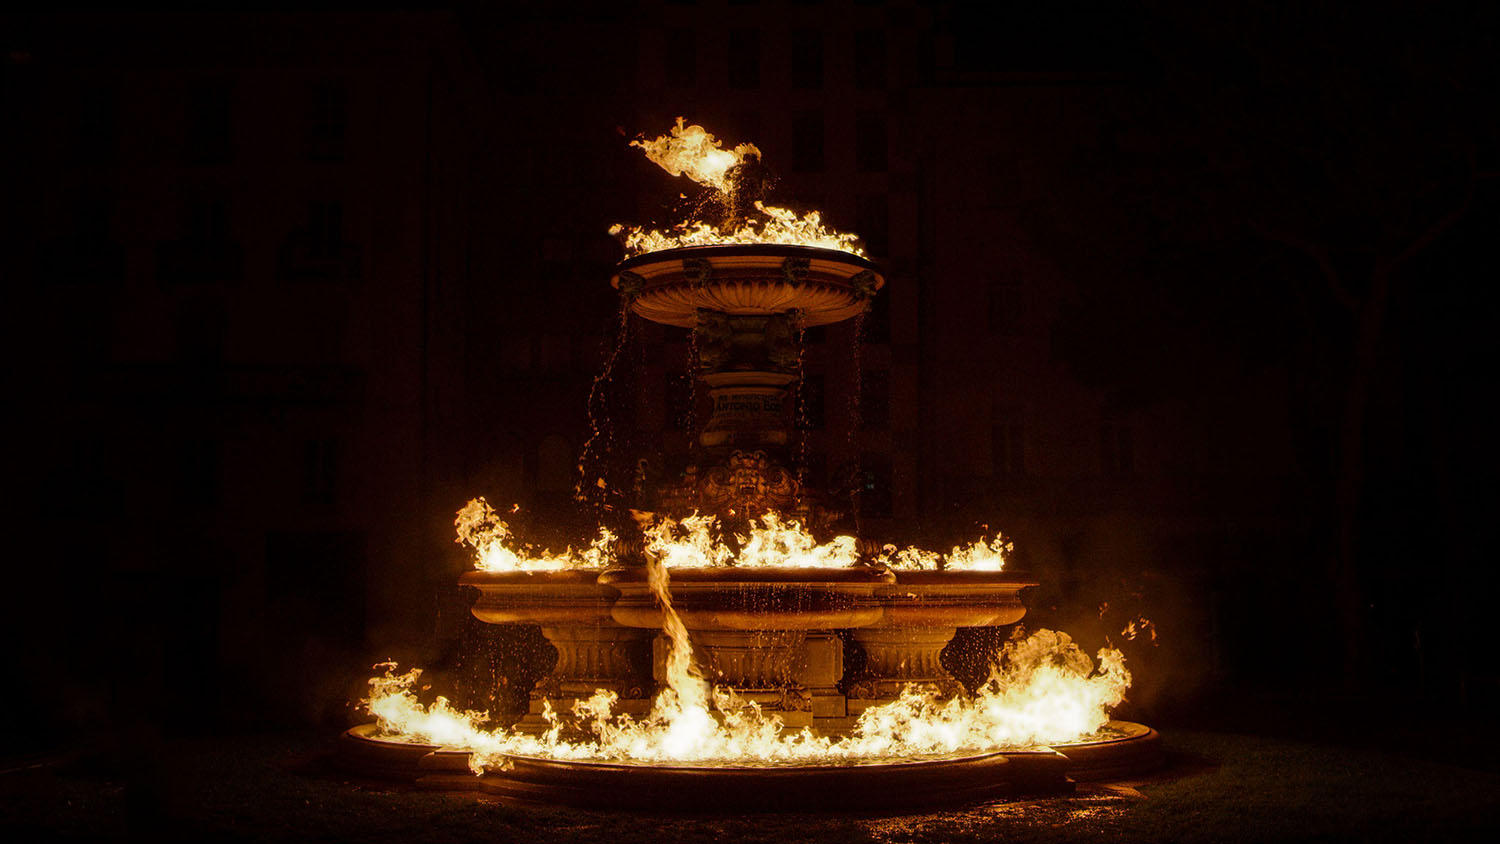 Fountain on fire.